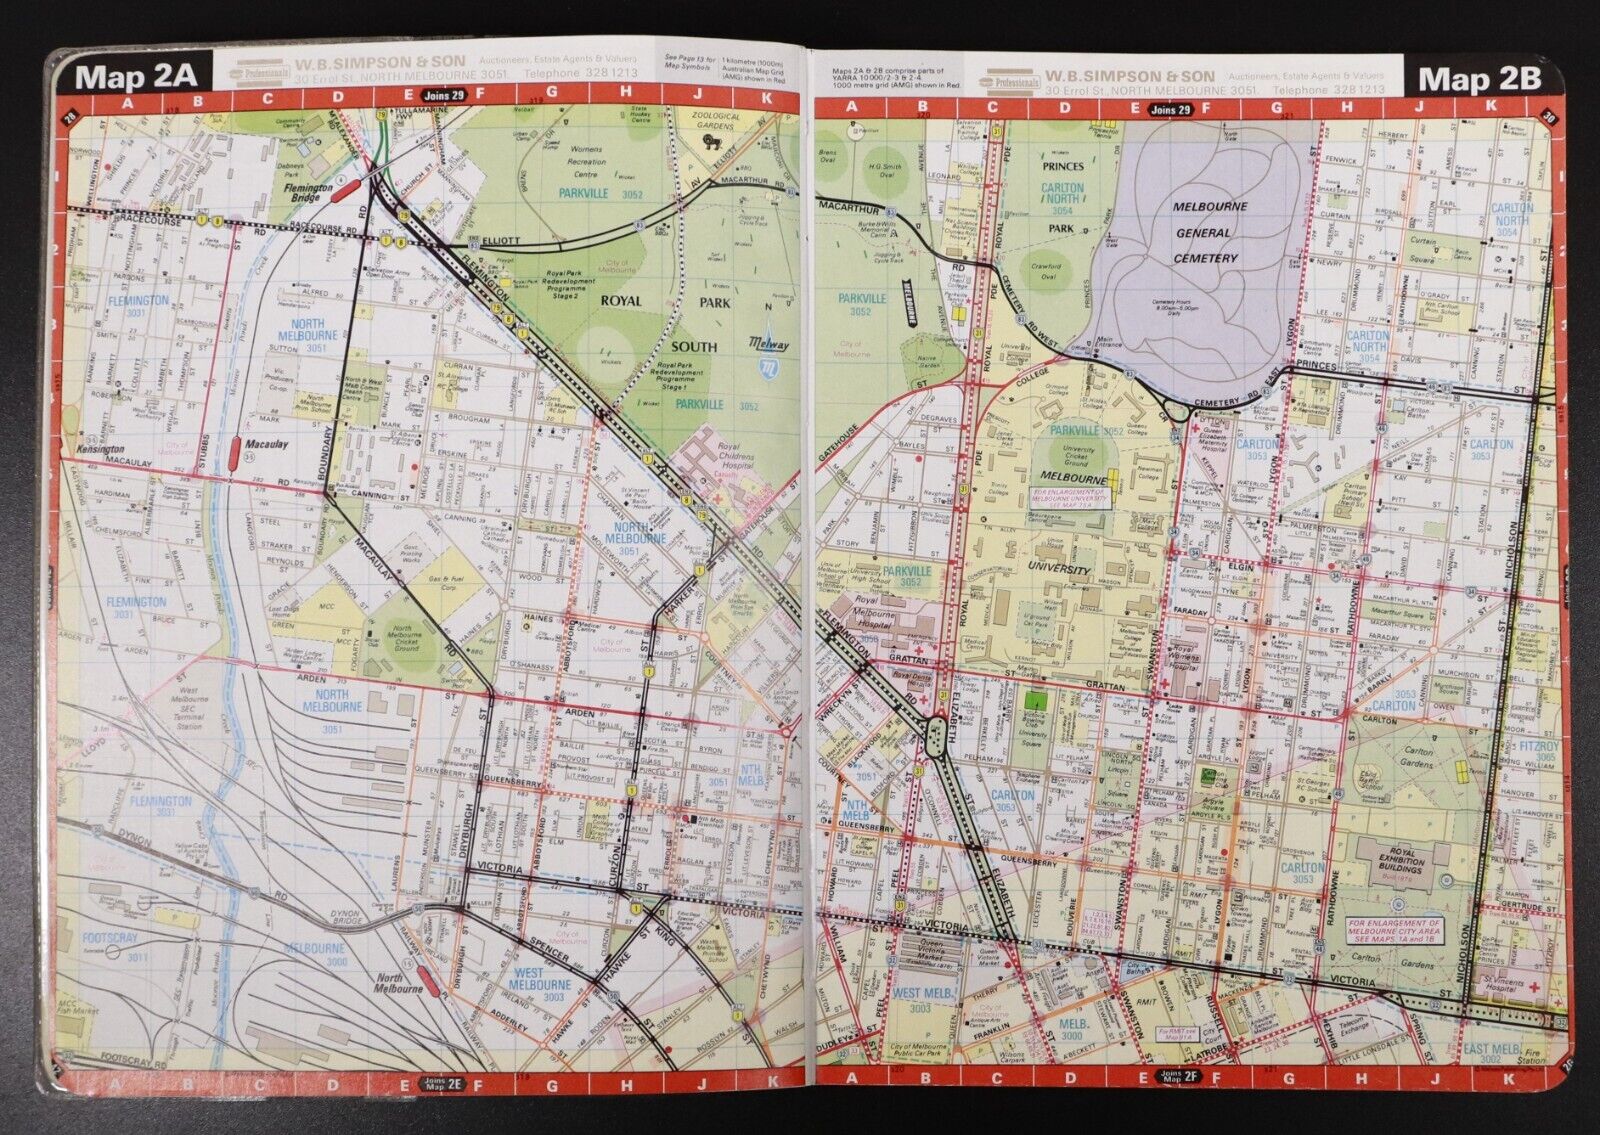 1989 Melway Street Directory Of Greater Melbourne Maps Book Melways Sleeve